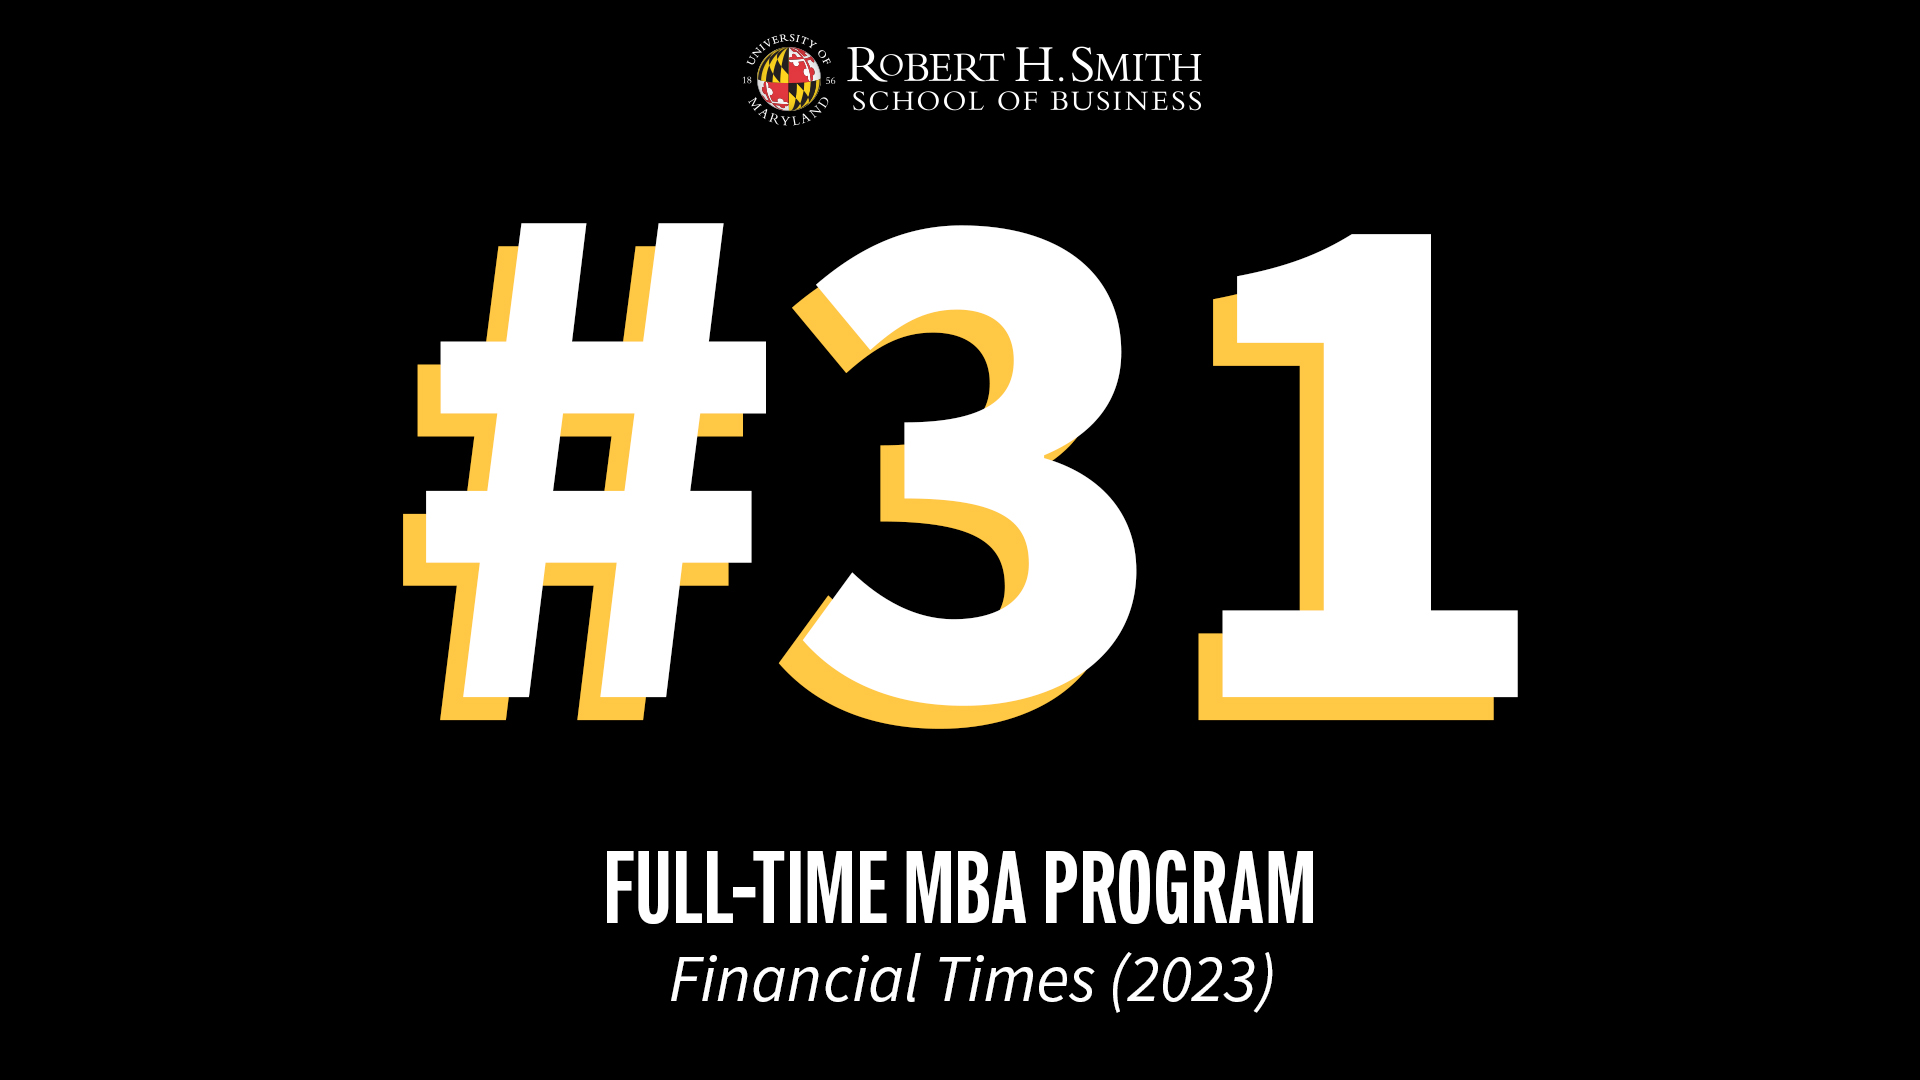 Maryland Smith Full-Time MBA Program No. 31 in Financial Times’ Top 100 Full-Time MBA Program Ranking